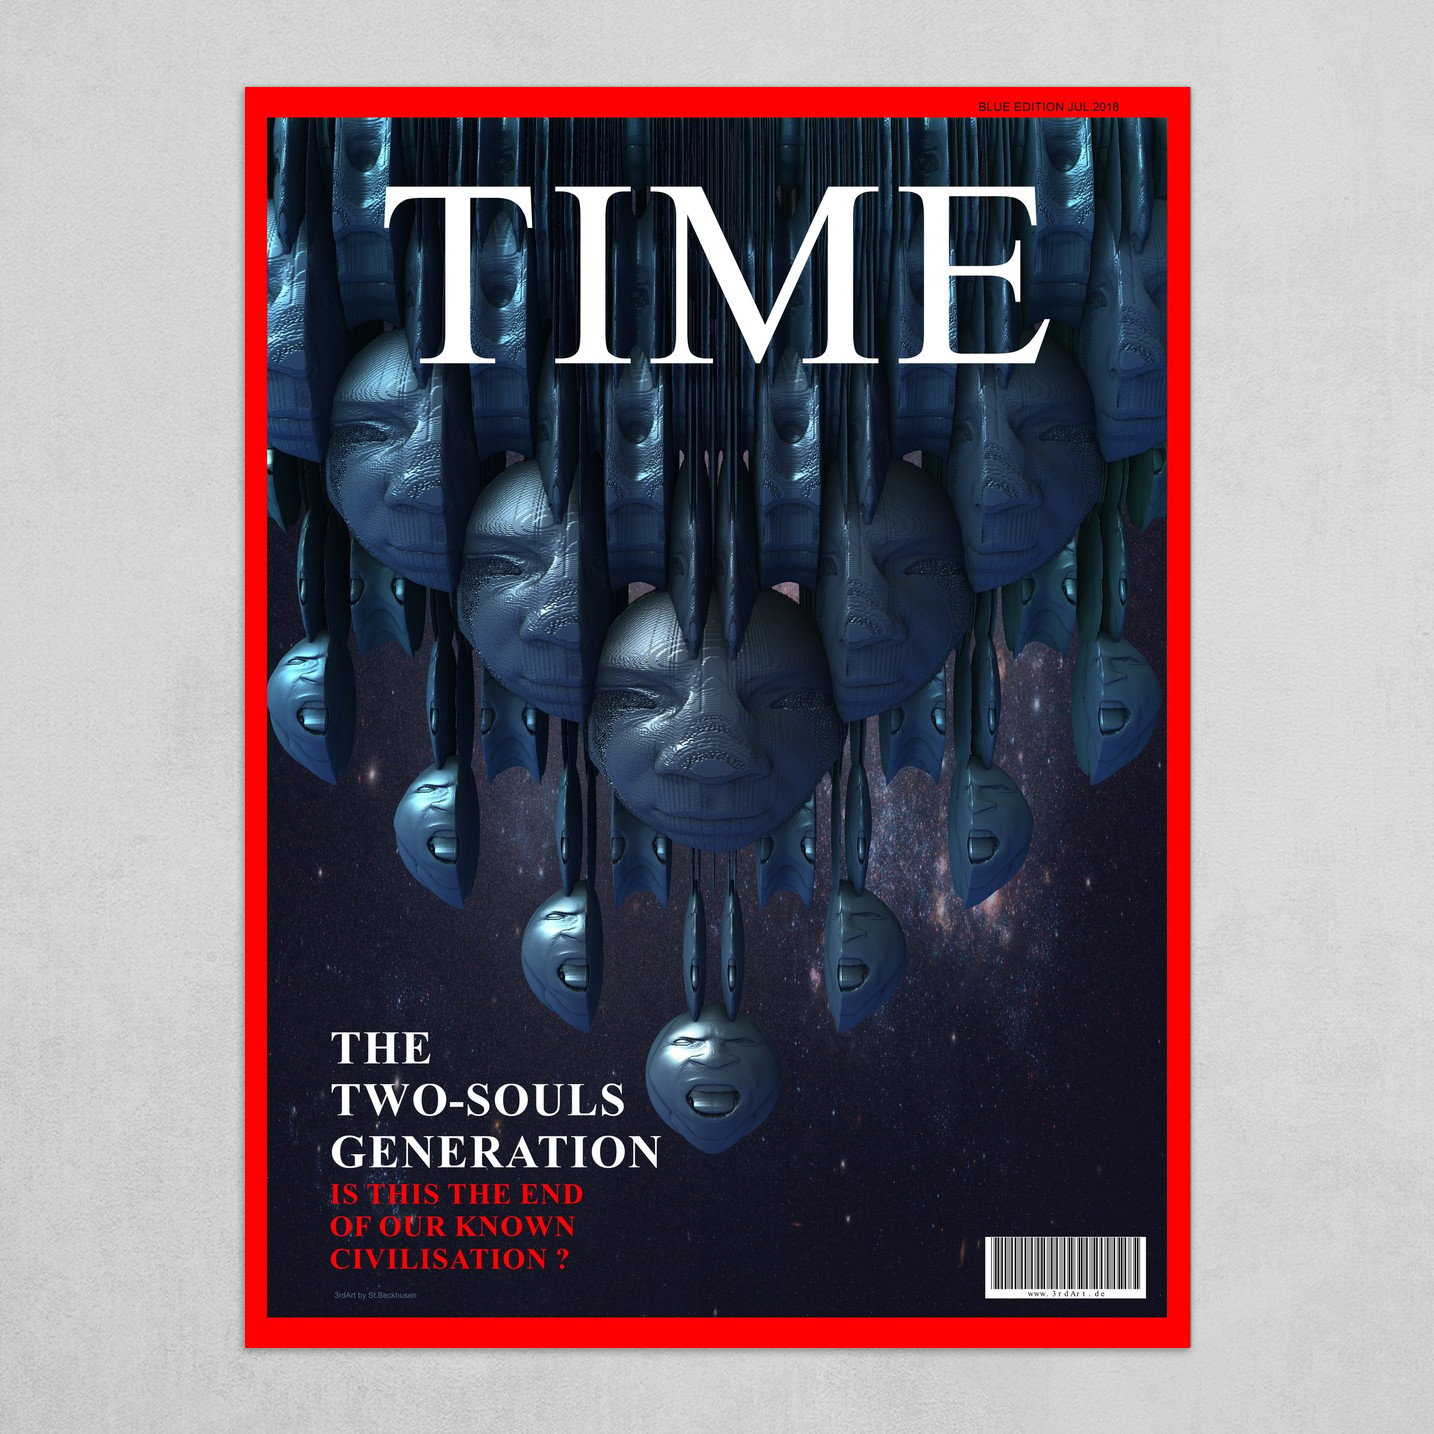 Time - The Two-Souls Generation (Blue Edition)